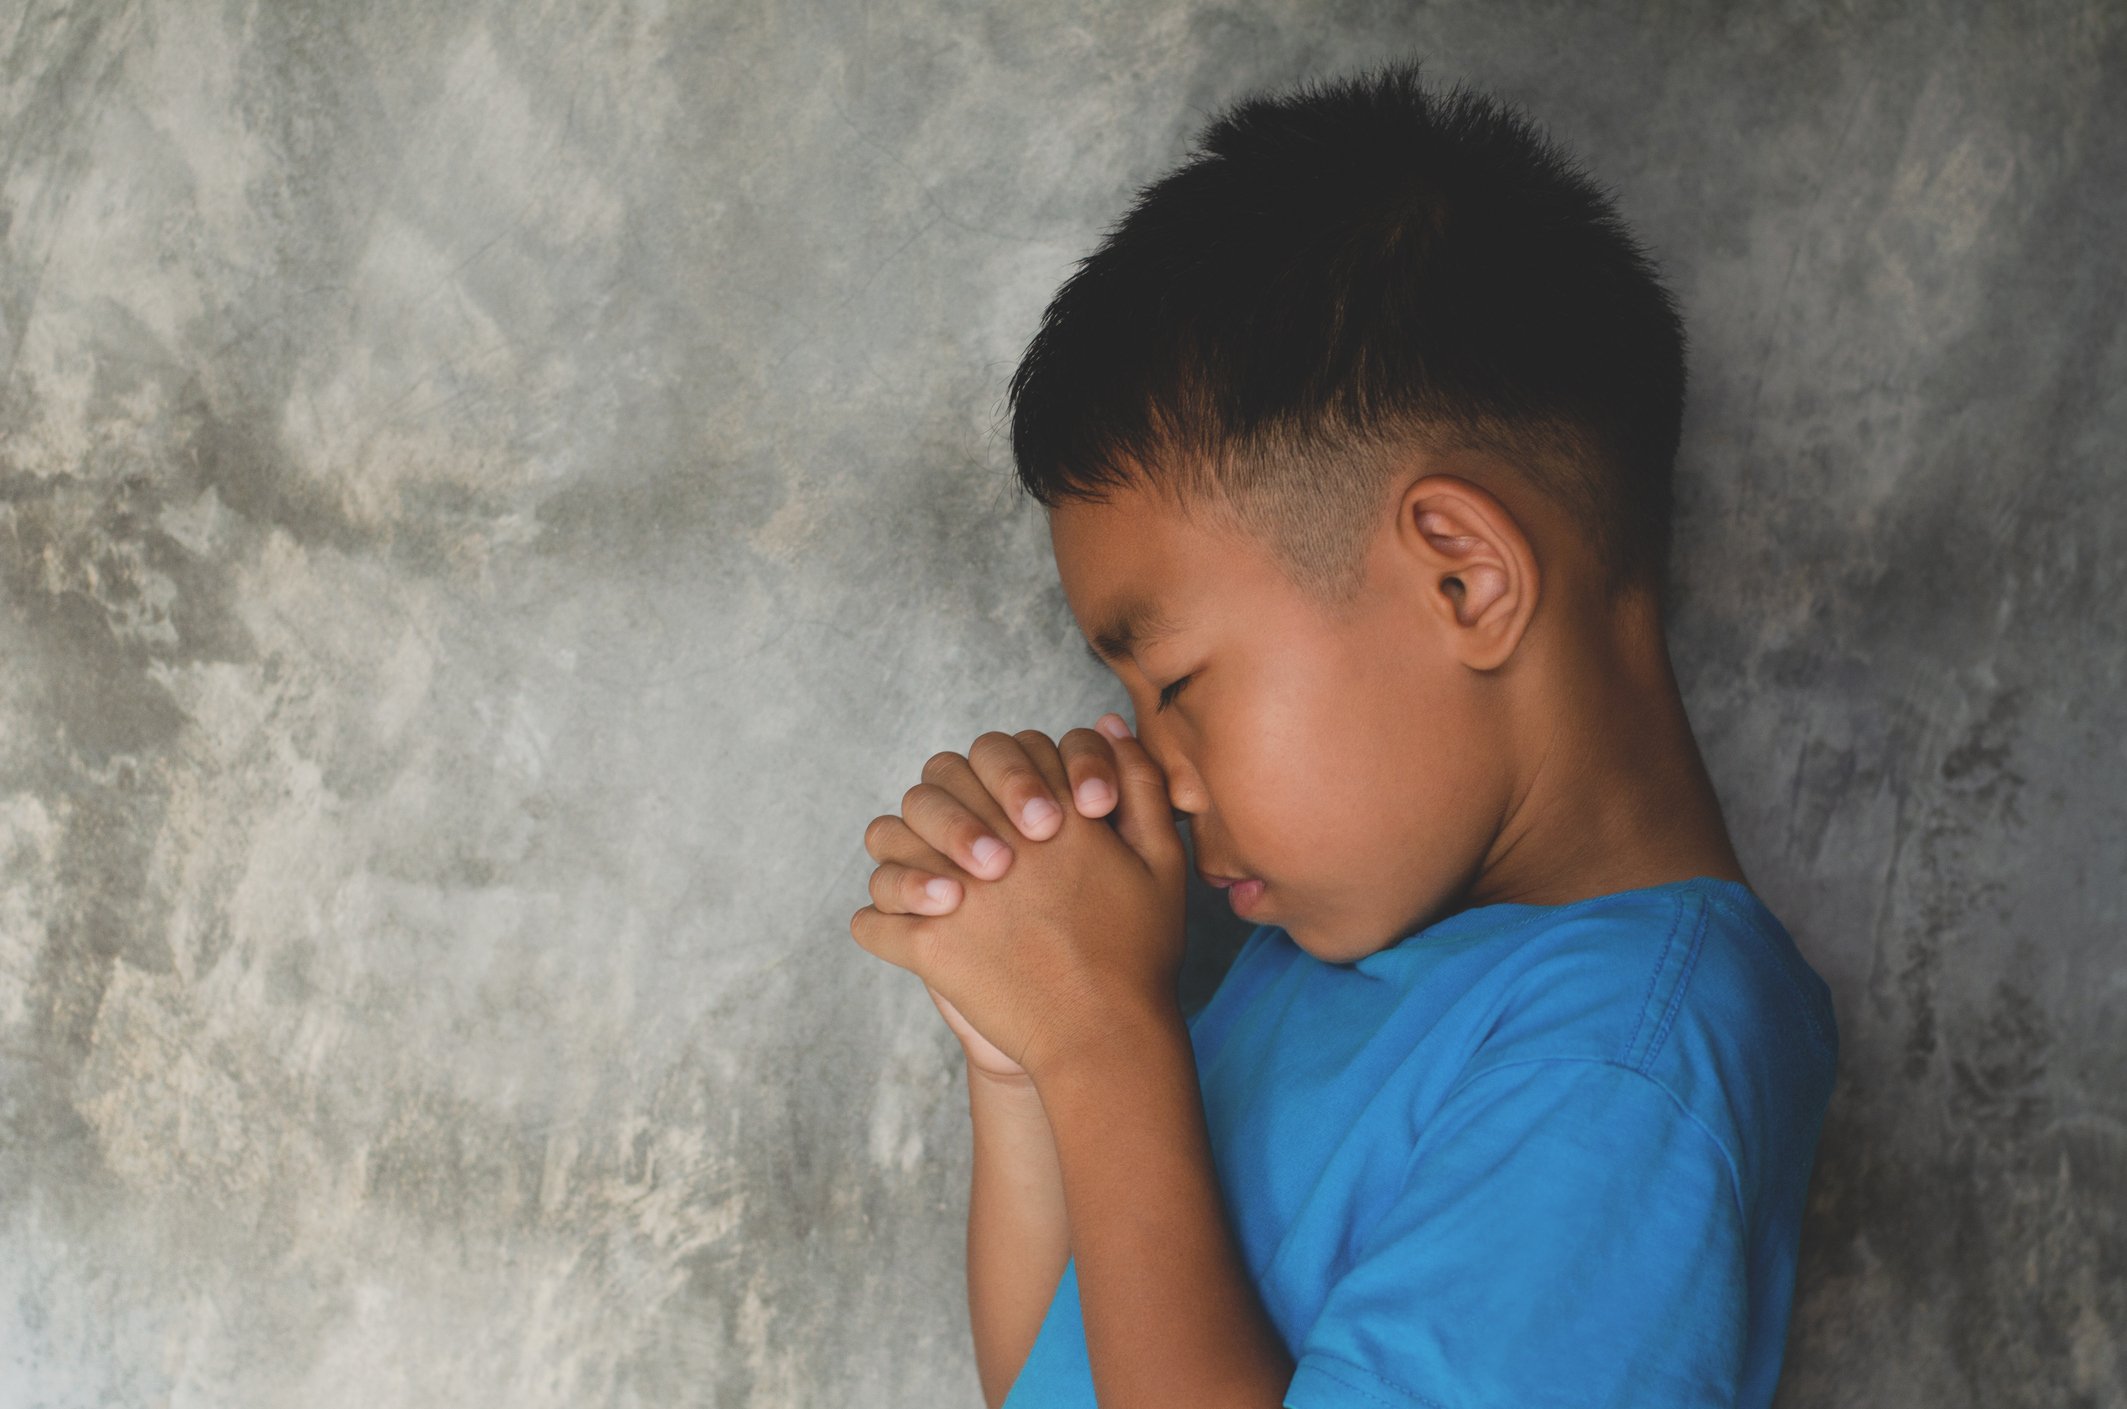 Side View Of Boy Praying By Wall |Photo: Getty images